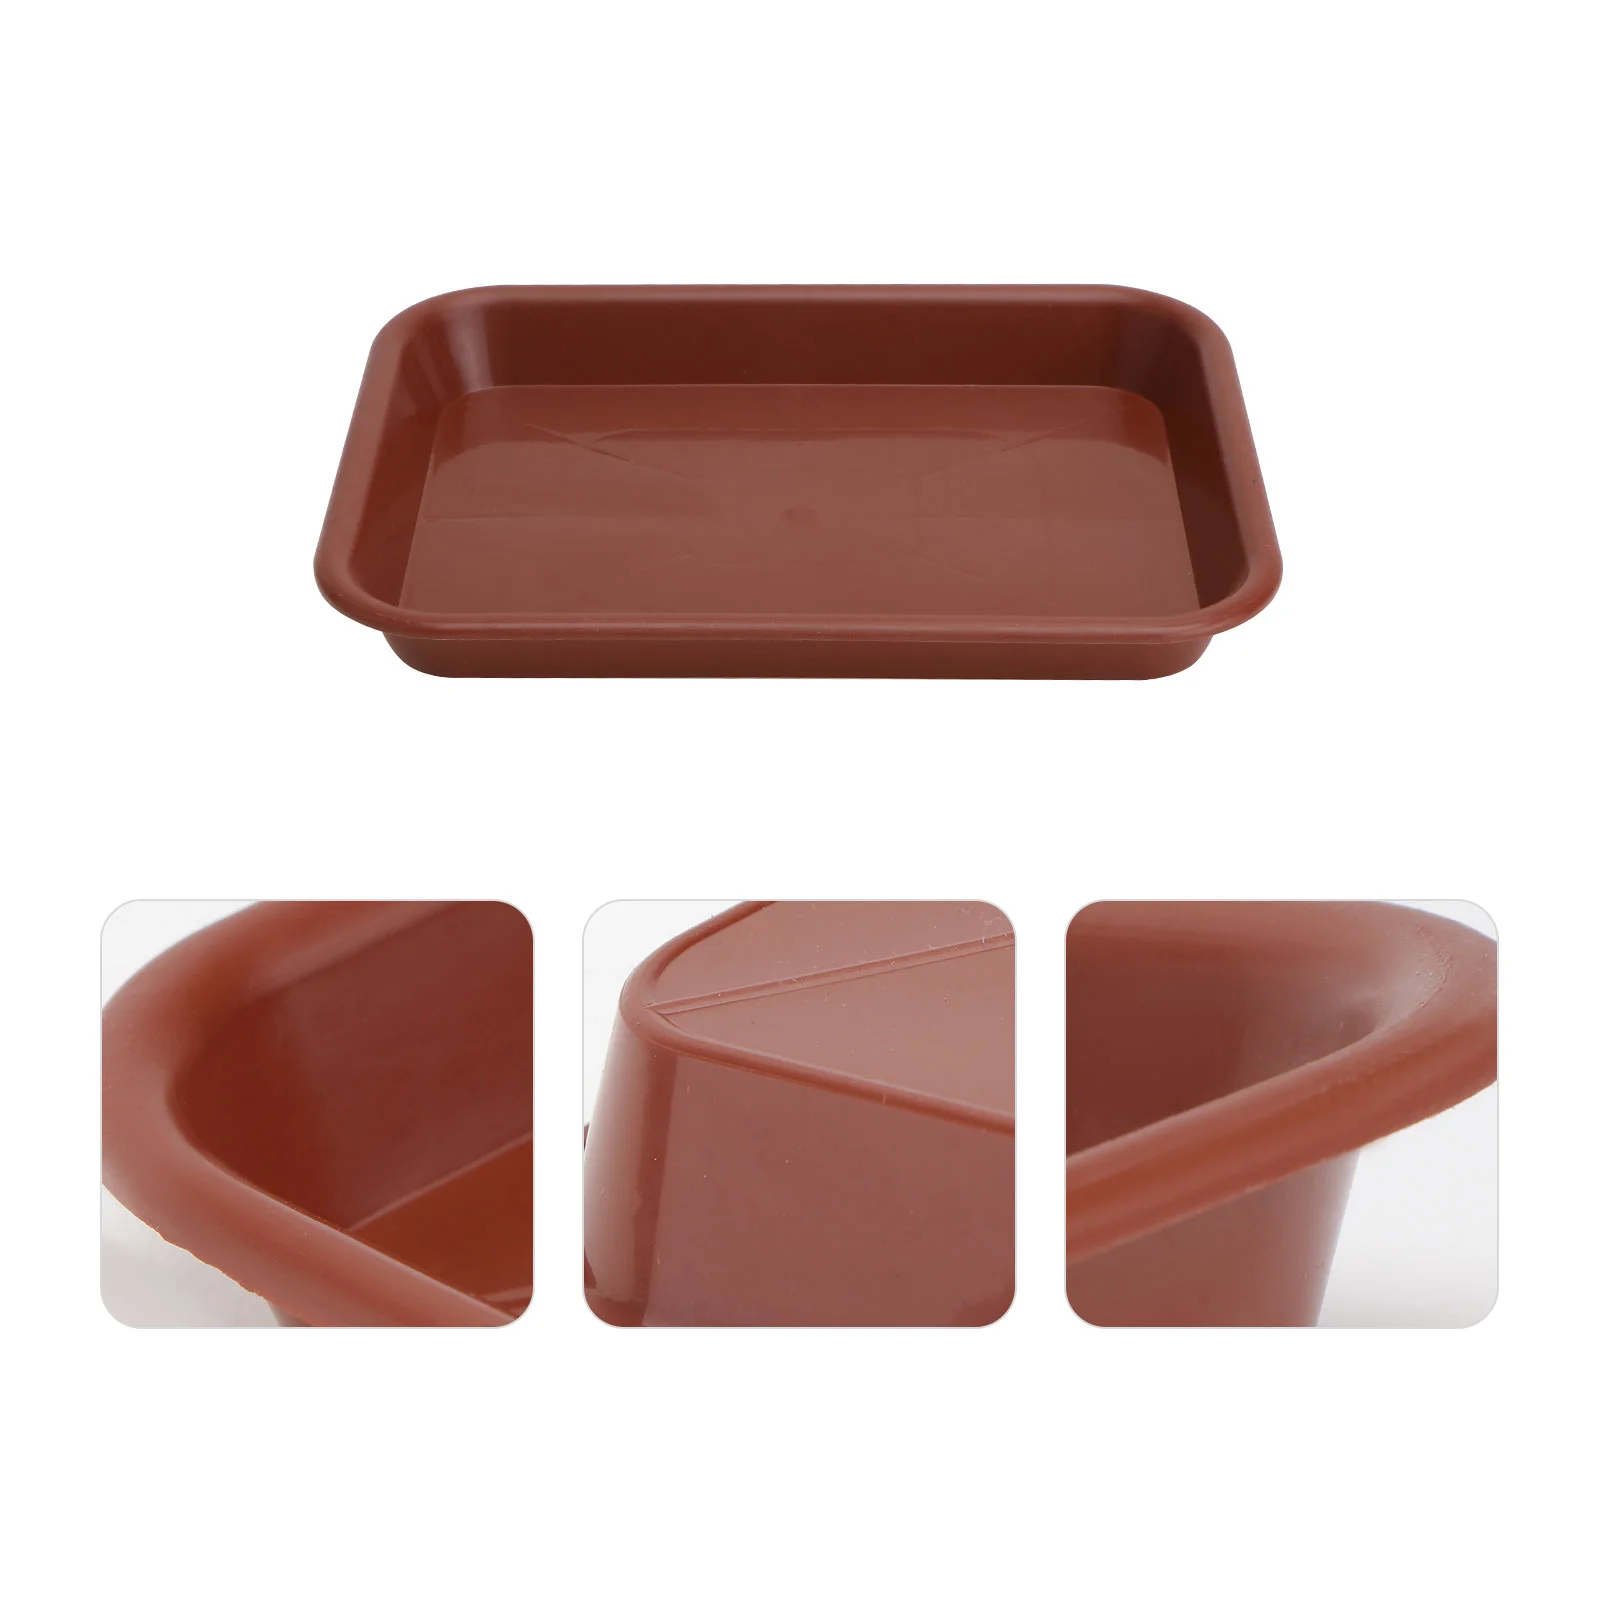 

Tray Pot Plastic Saucer Flower Planter Flowerpot Trays Drip Saucers Pots Plate Base Bottom Planters Round Bases Dish for plants